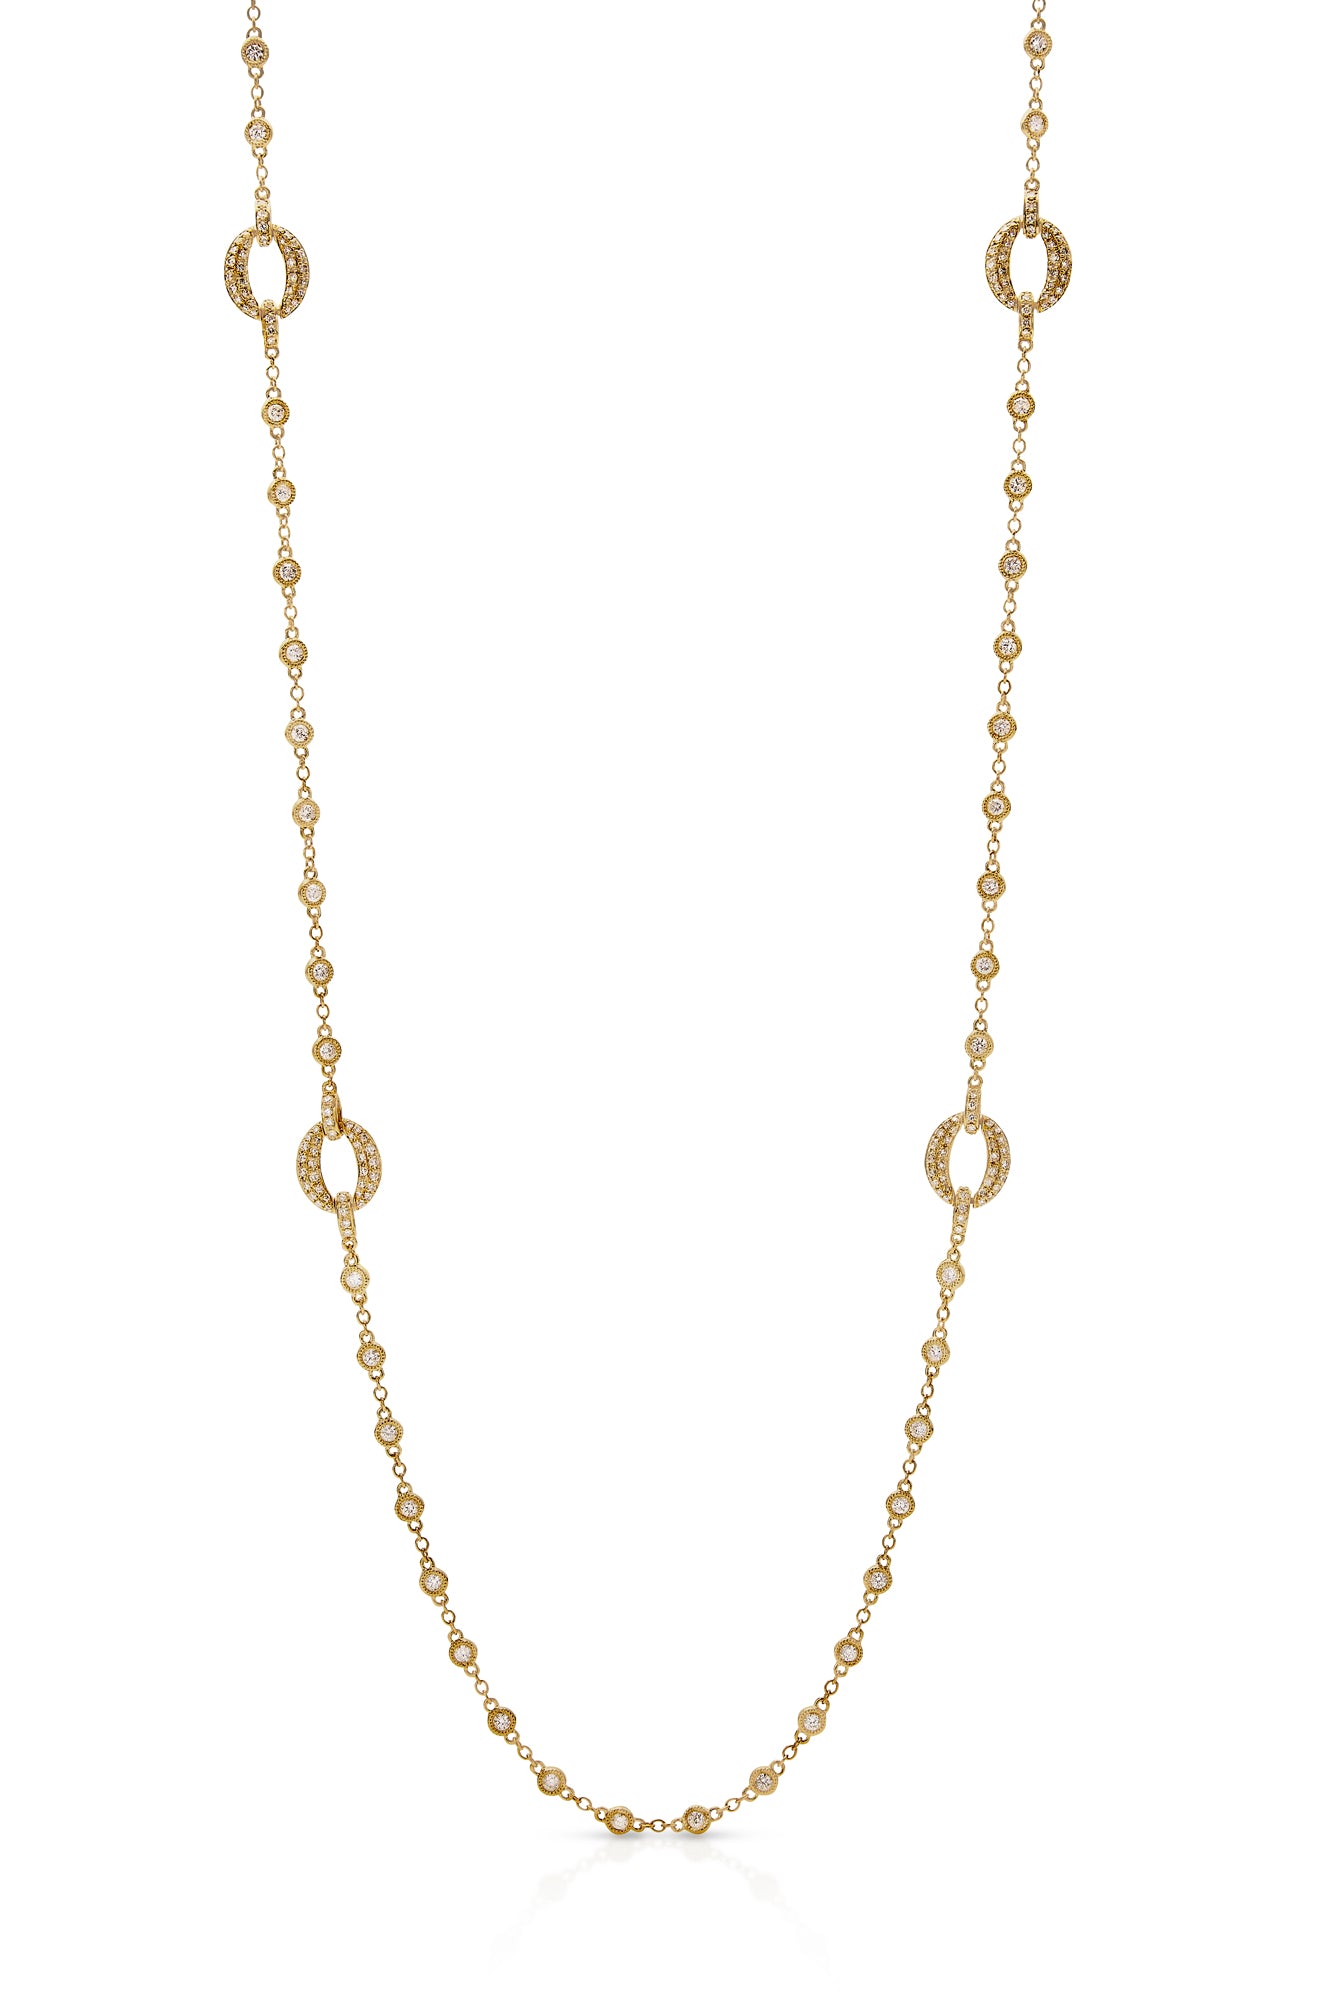 18K Yellow Gold Cascade Collection Yard Chain Necklace